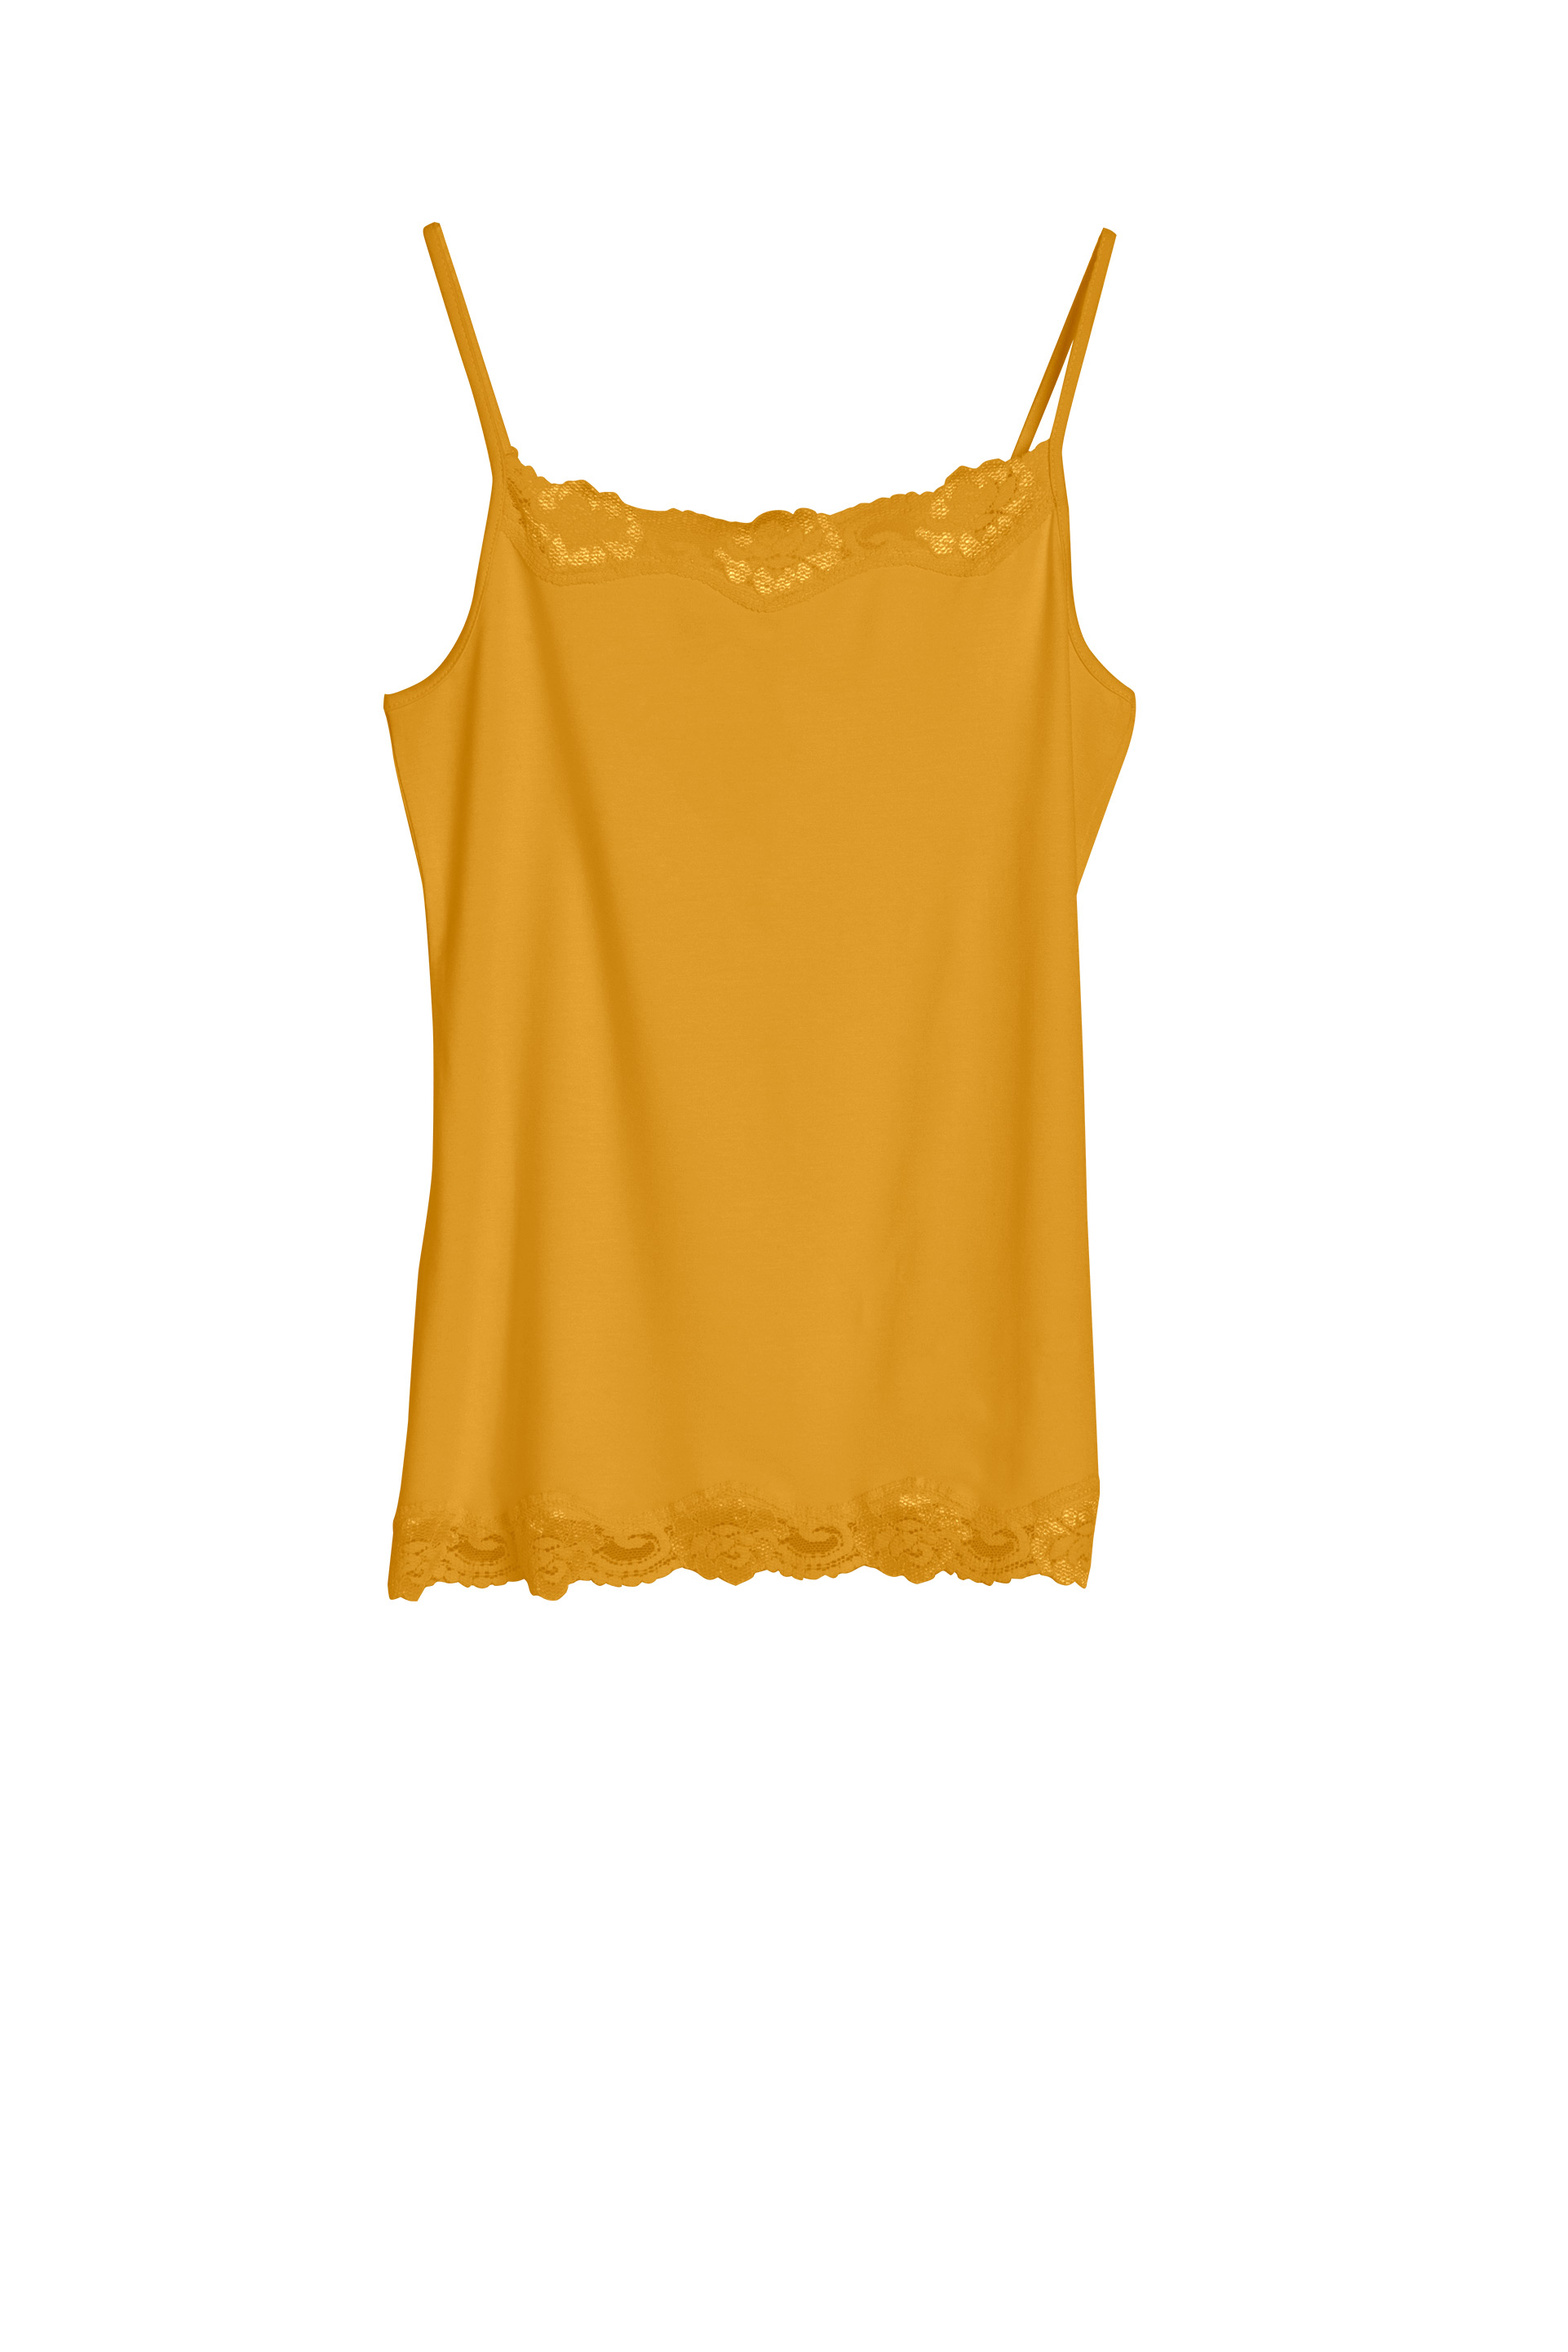 7200_lace_camisole_gold.jpg